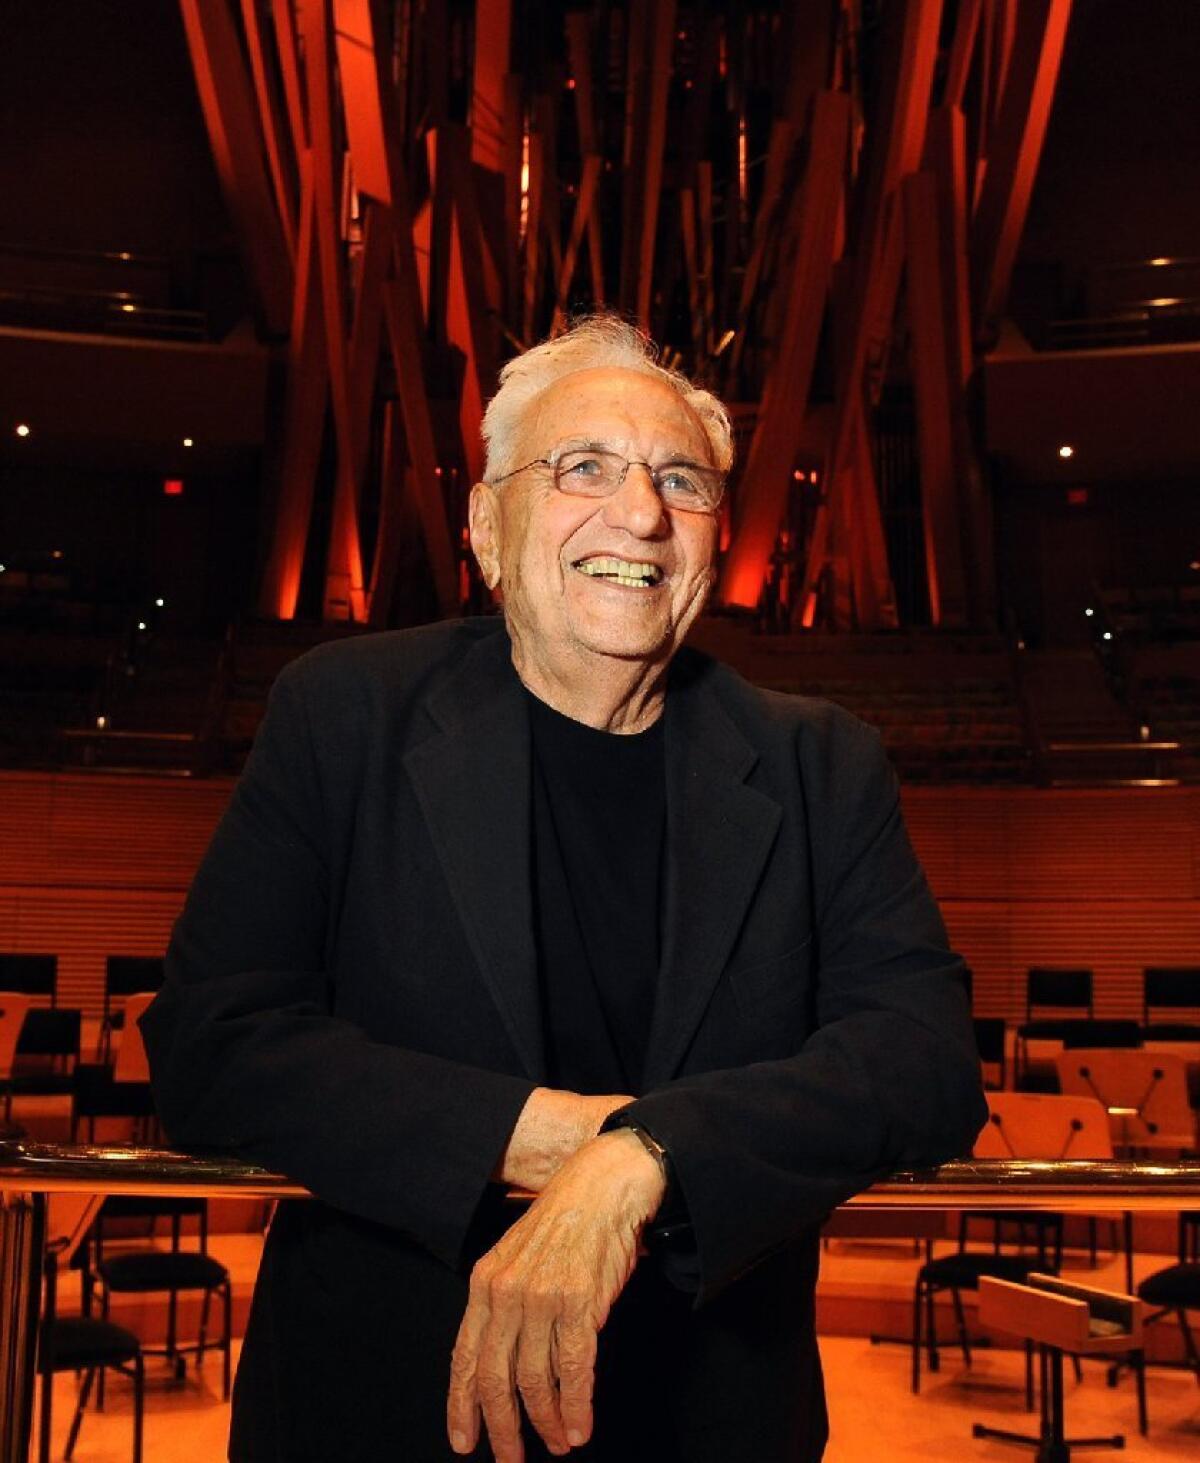 Frank Gehry, pictured inside Walt Disney Concert Hall in 2013, has won this year's J. Paul Getty Medal for career contributions to visual art.